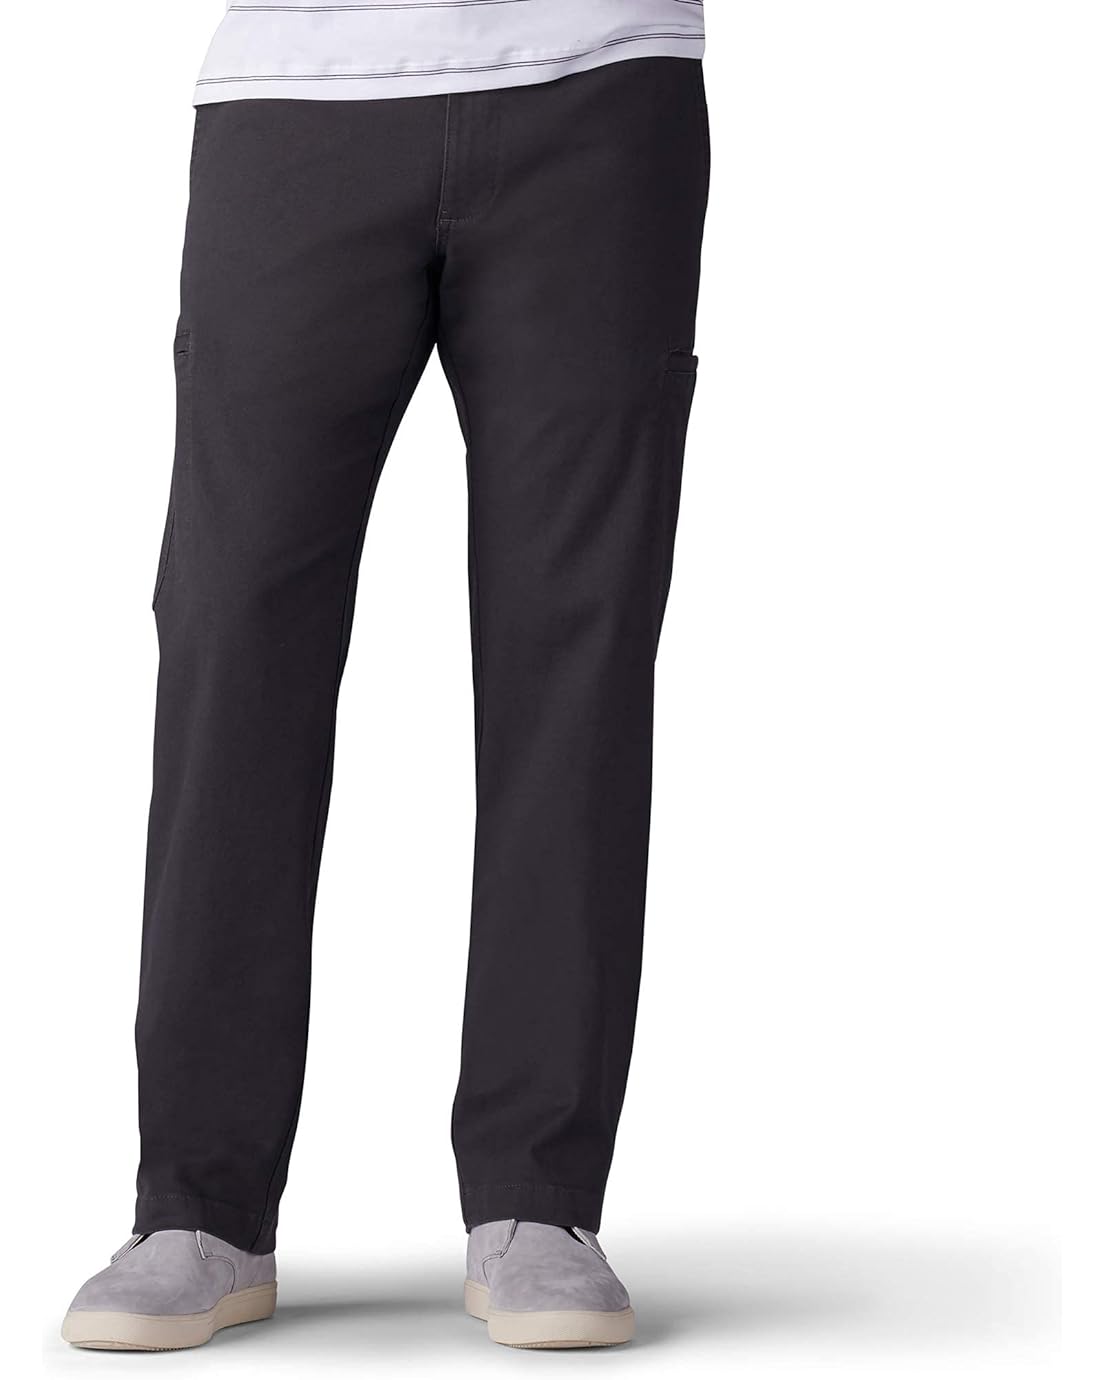 Lee Mens Performance Series Extreme Comfort Cargo Pant